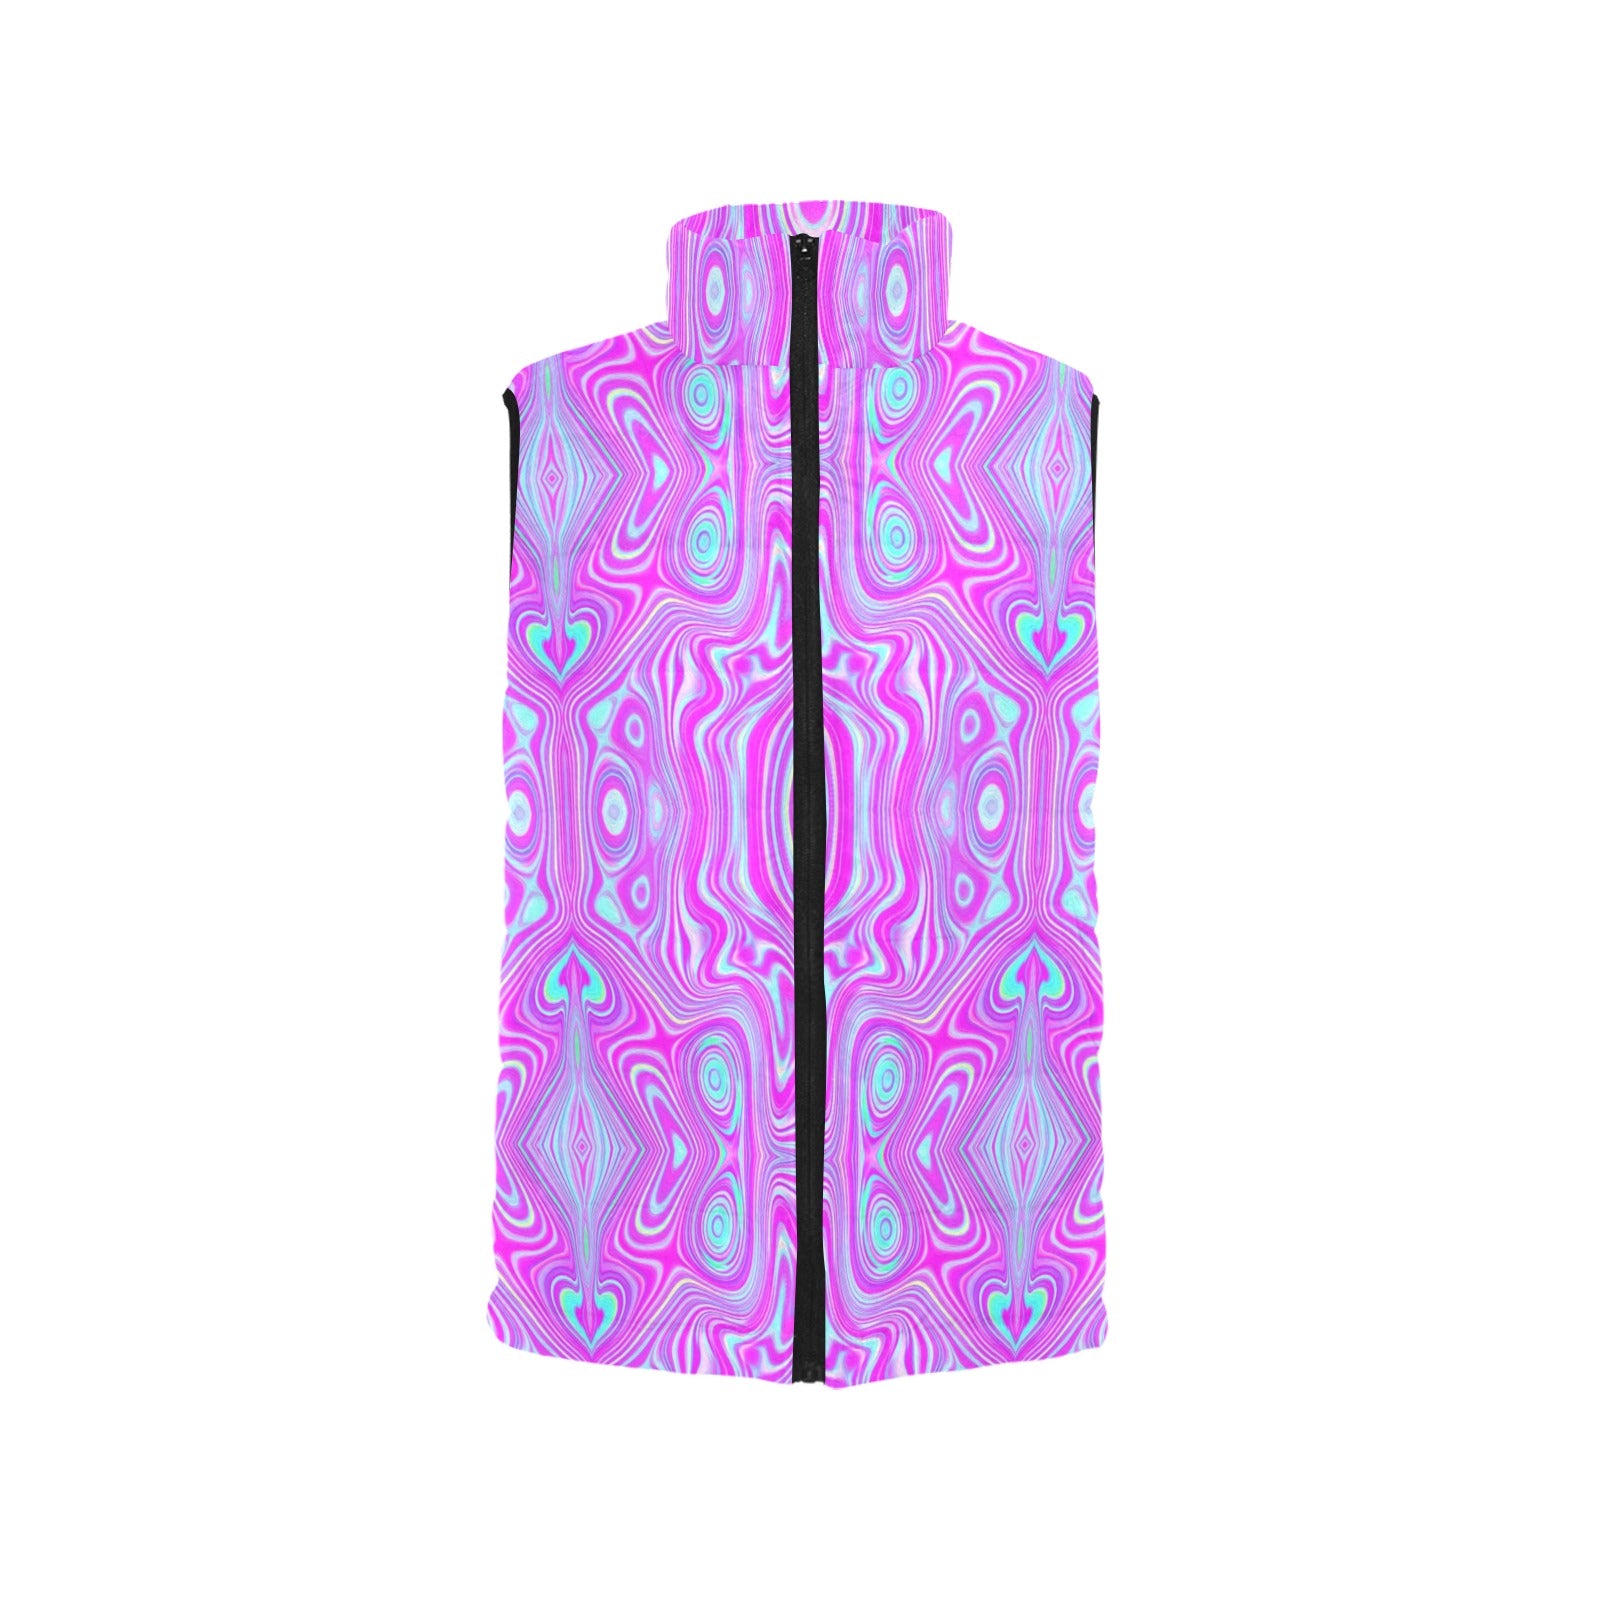 Women's Stand Collar Vest, Trippy Hot Pink and Aqua Blue Abstract Pattern